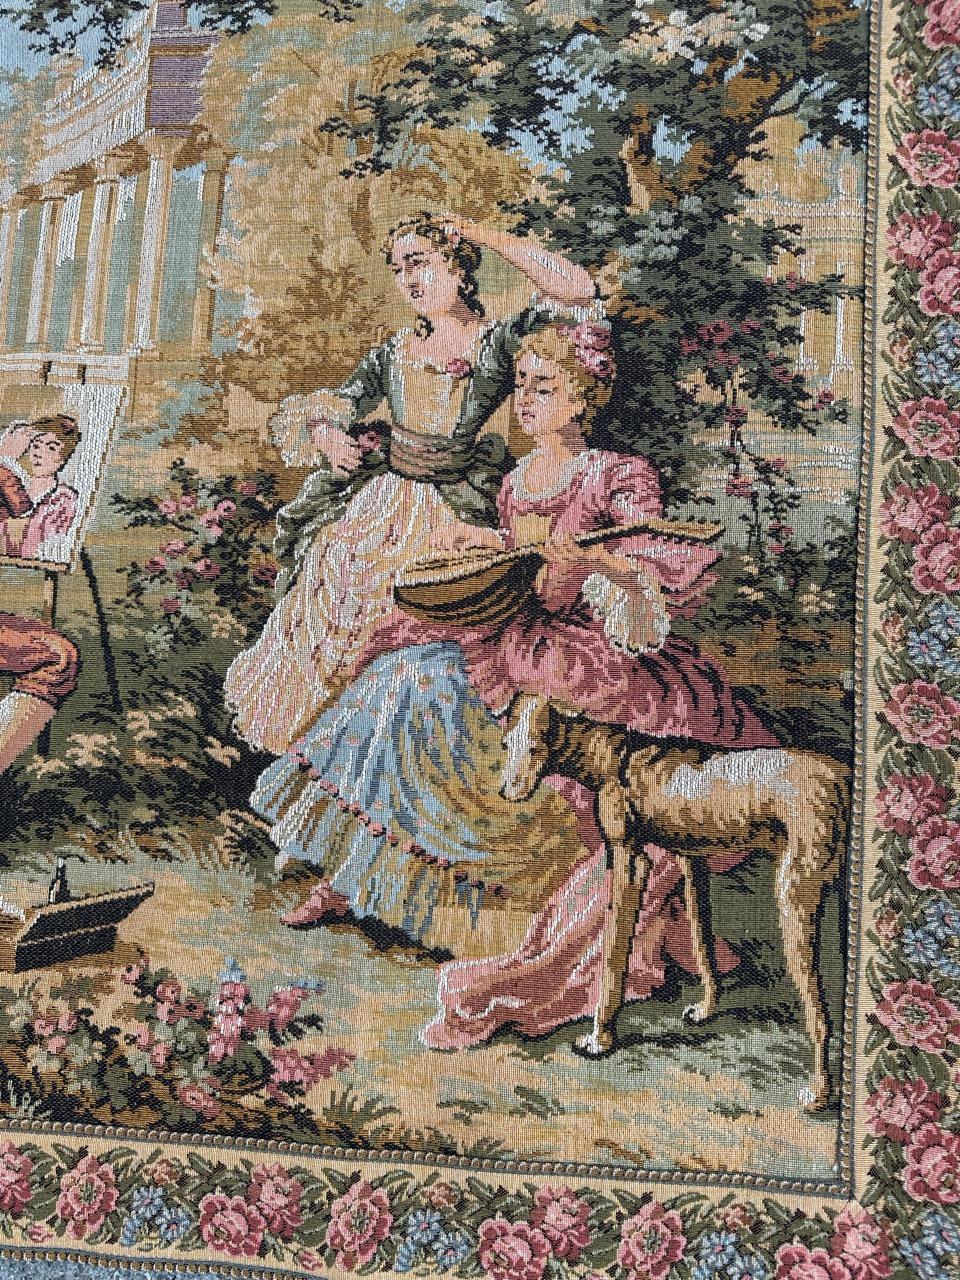 “Exquisite tapestry from the late 20th century, crafted in cotton on Jacquard looms by Goblys workshops in France. This Aubusson-style Jacquard tapestry beautifully captures a scene of a countryside luncheon, blending shared moments and the joy of